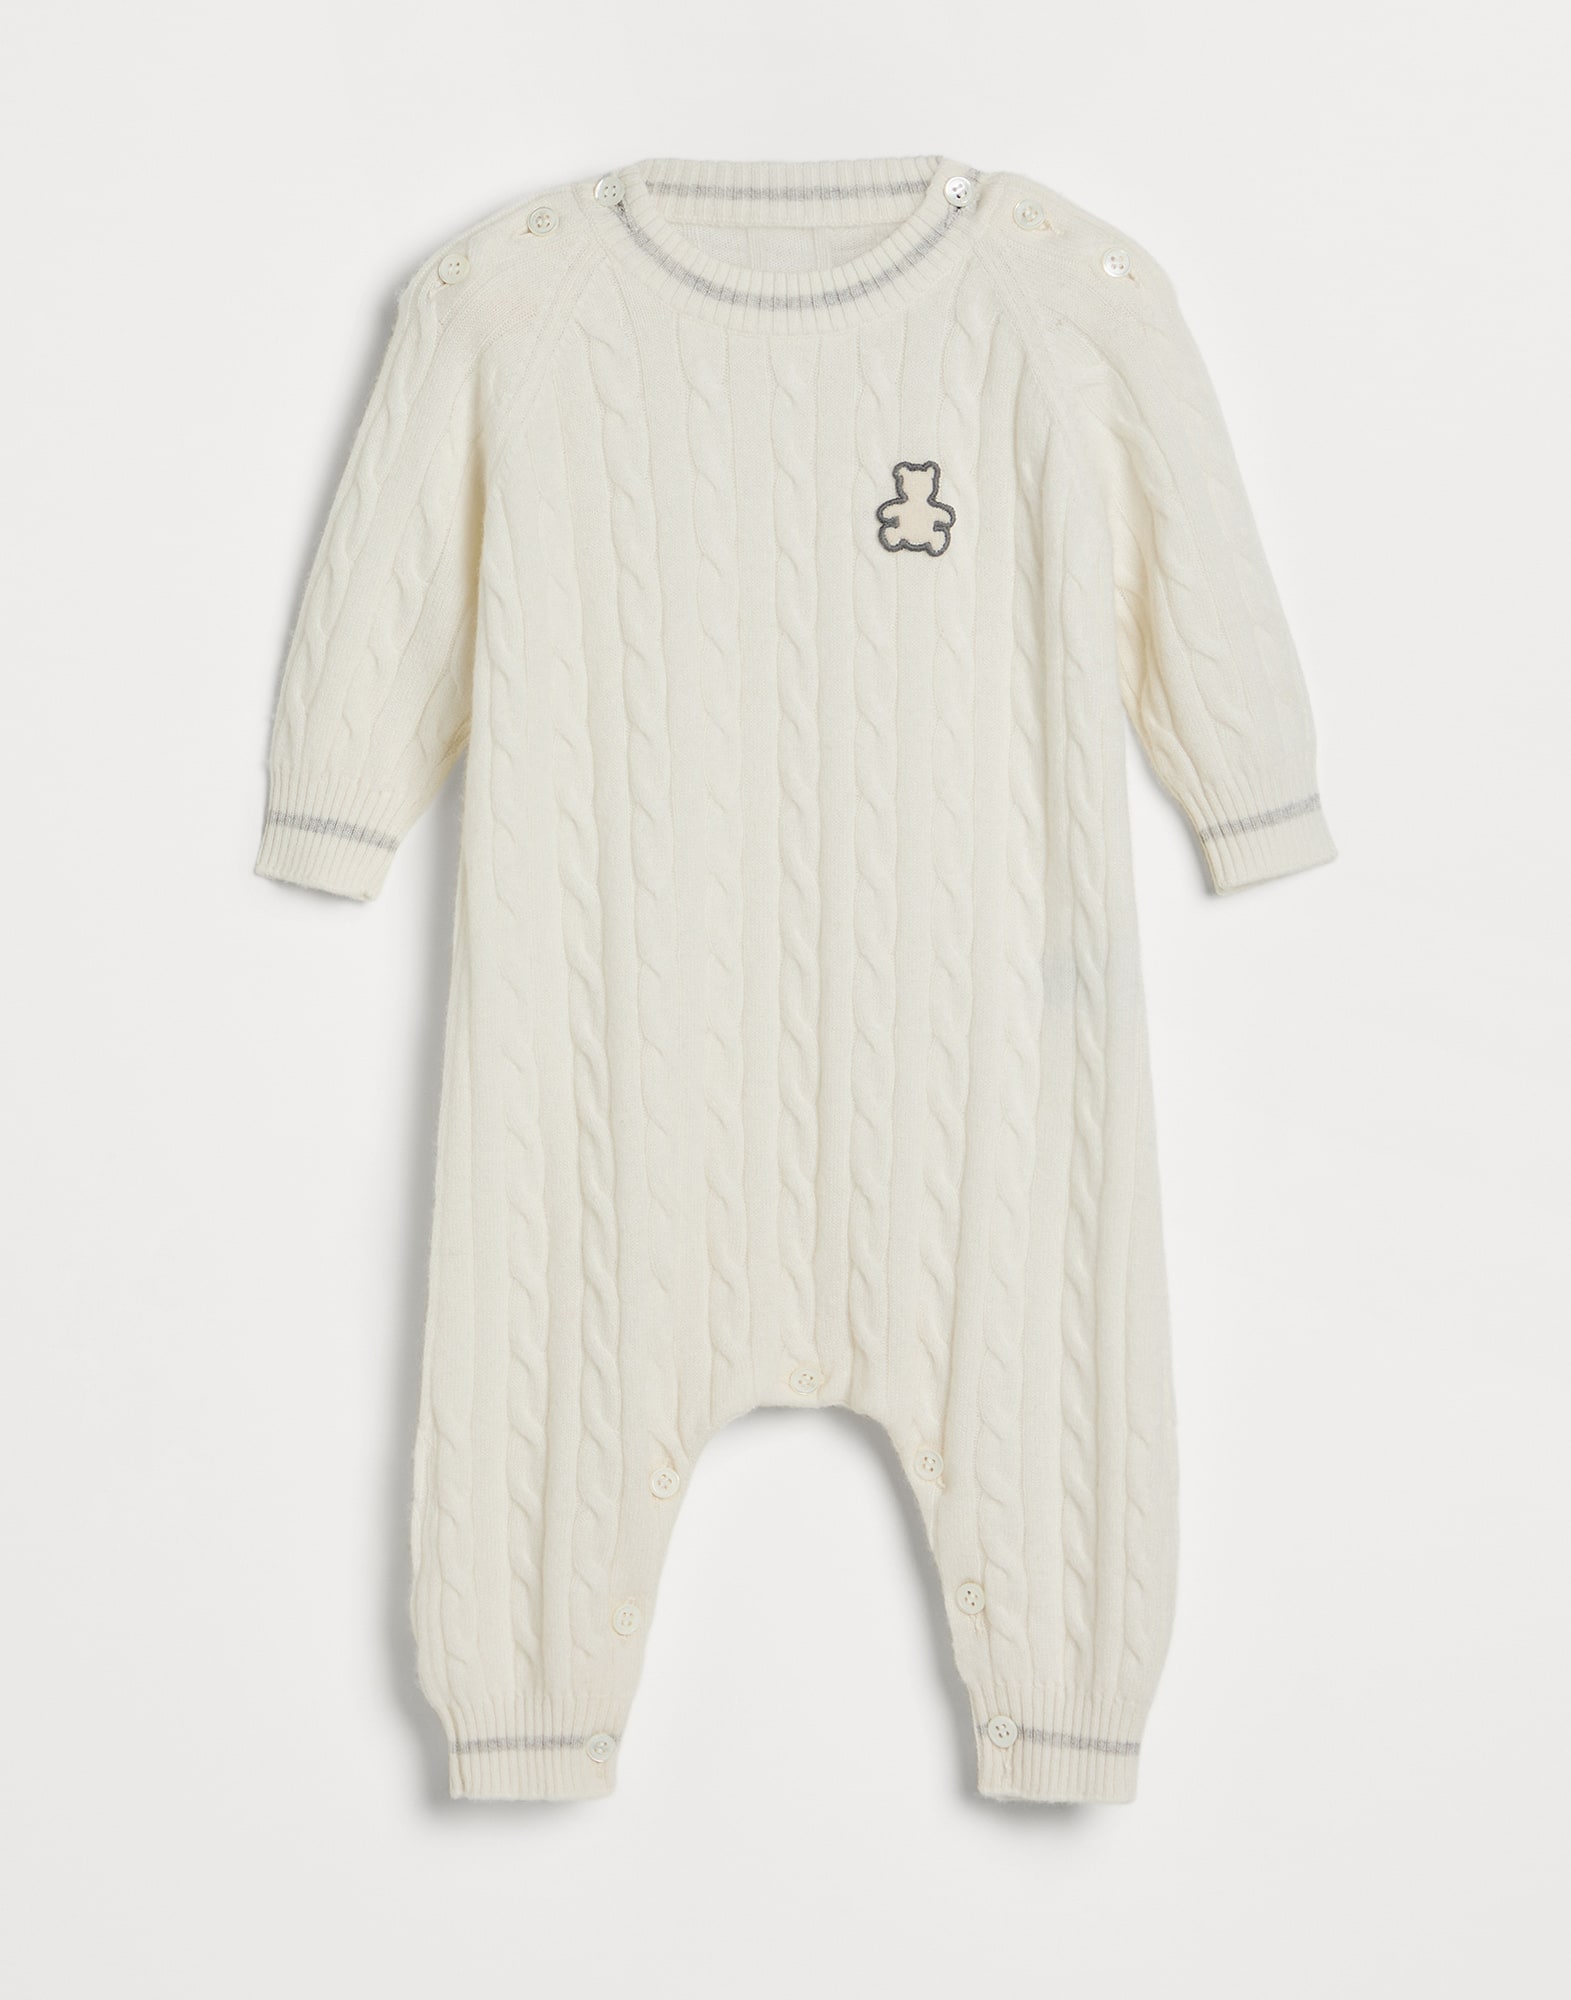 Baby body & Romper - Front view